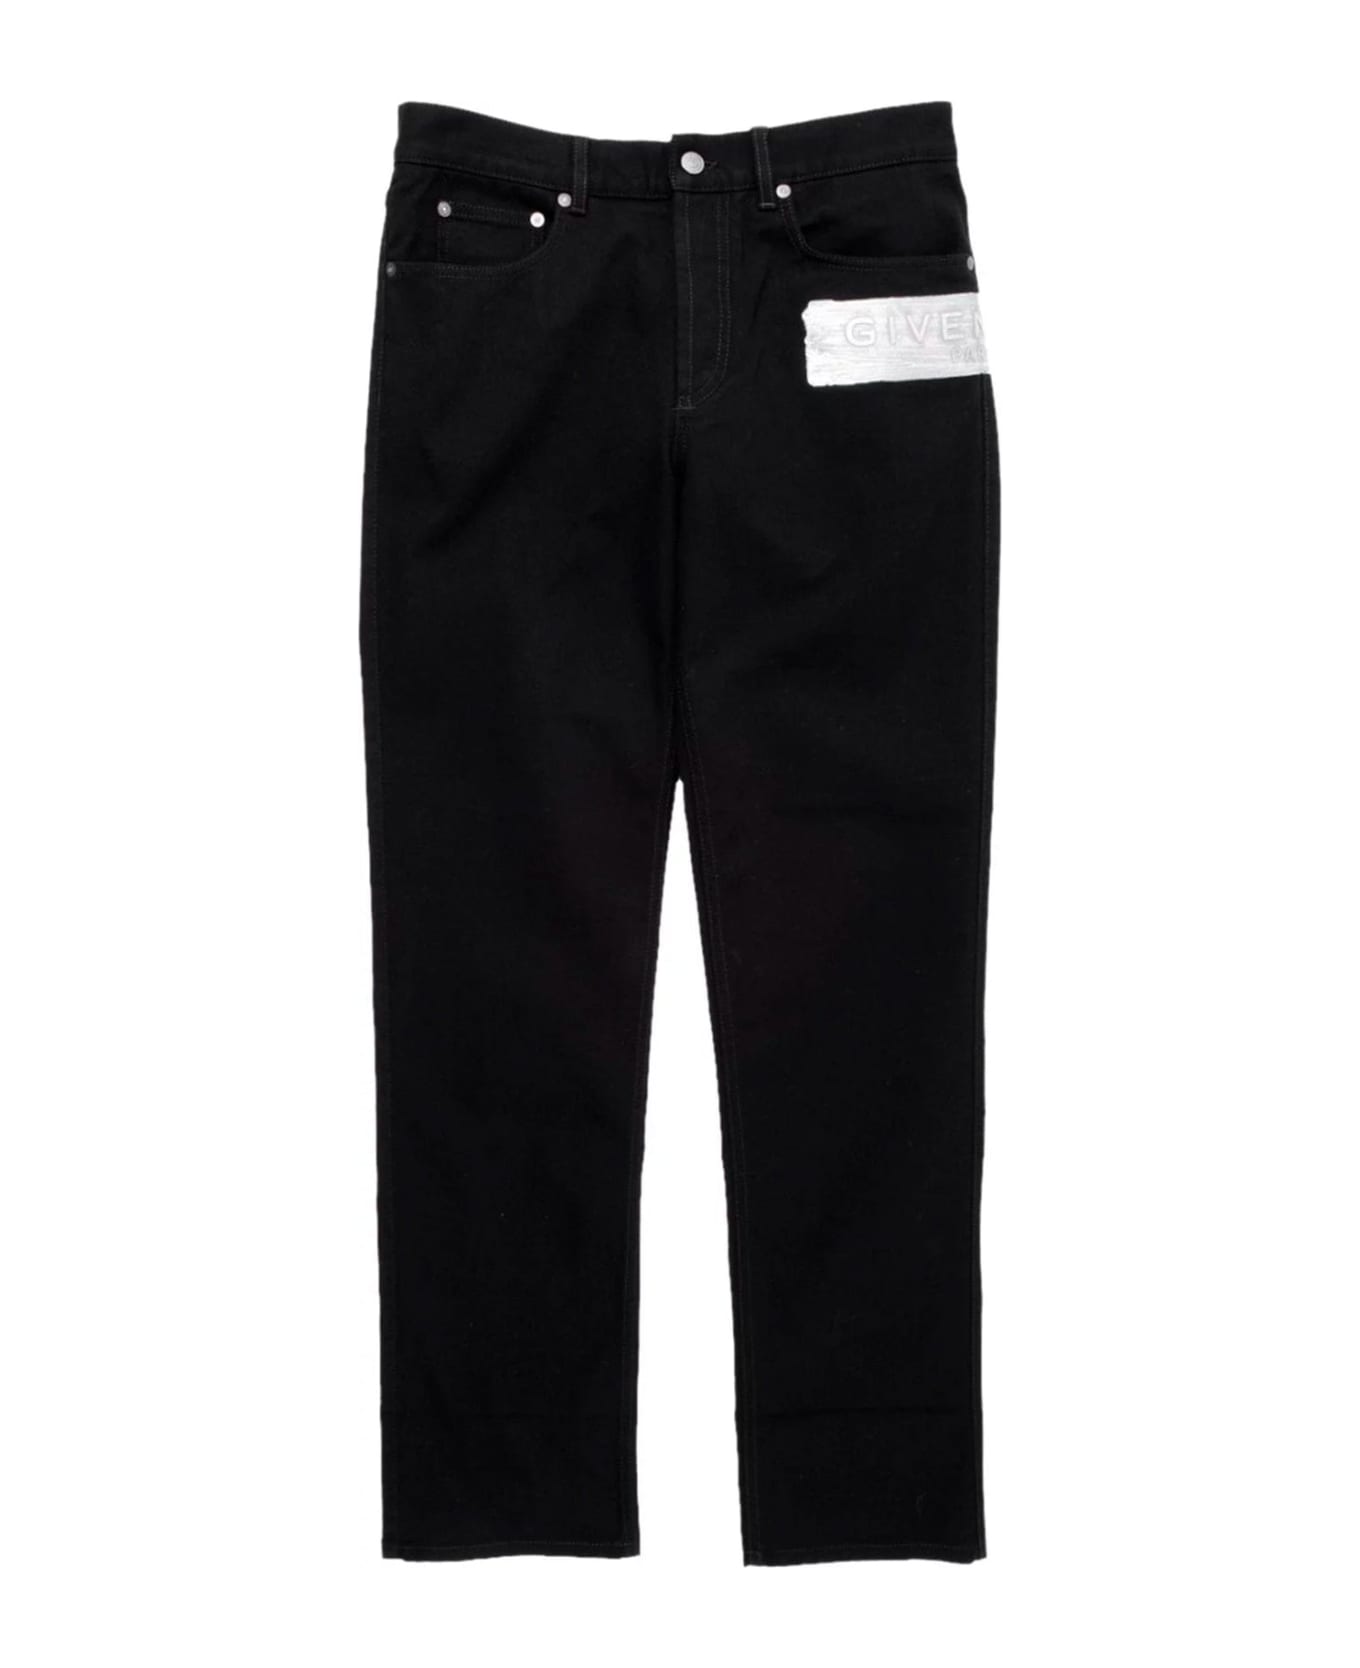 Givenchy Jeans - Black ボトムス